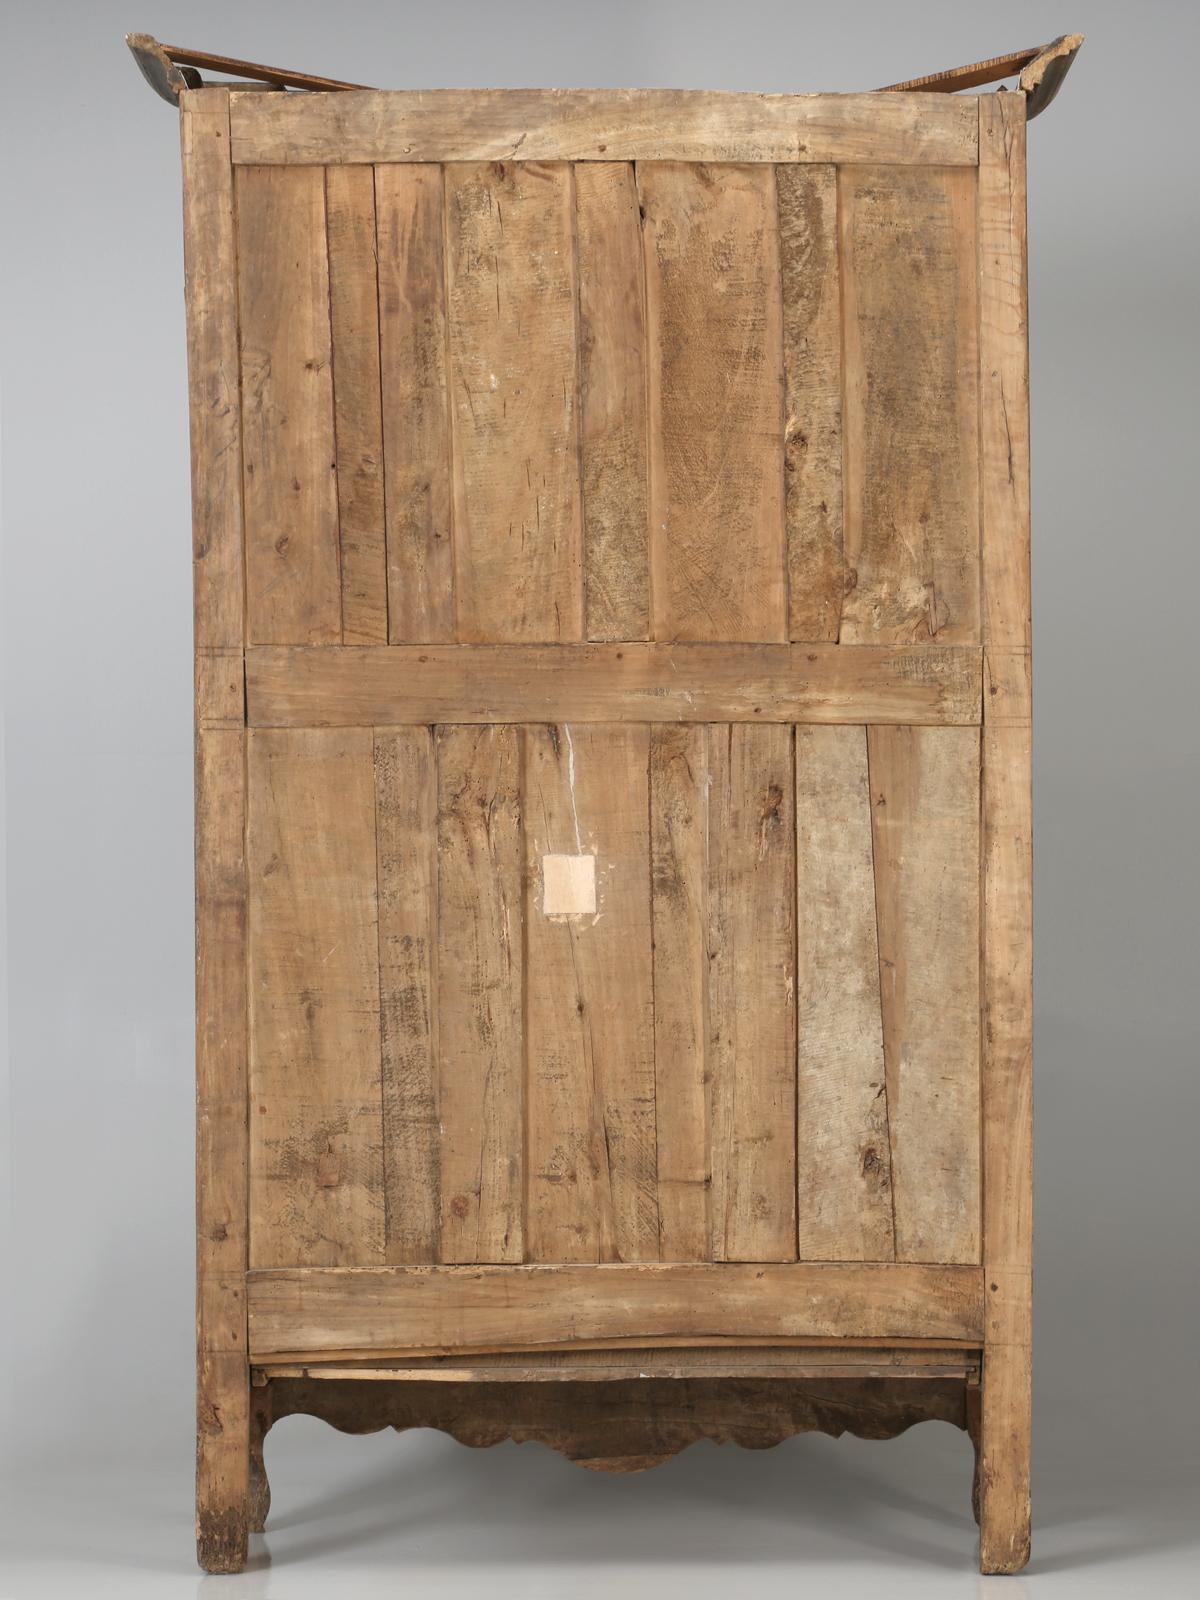 Antique French Armoire Restored, circa 200 Years Old 10